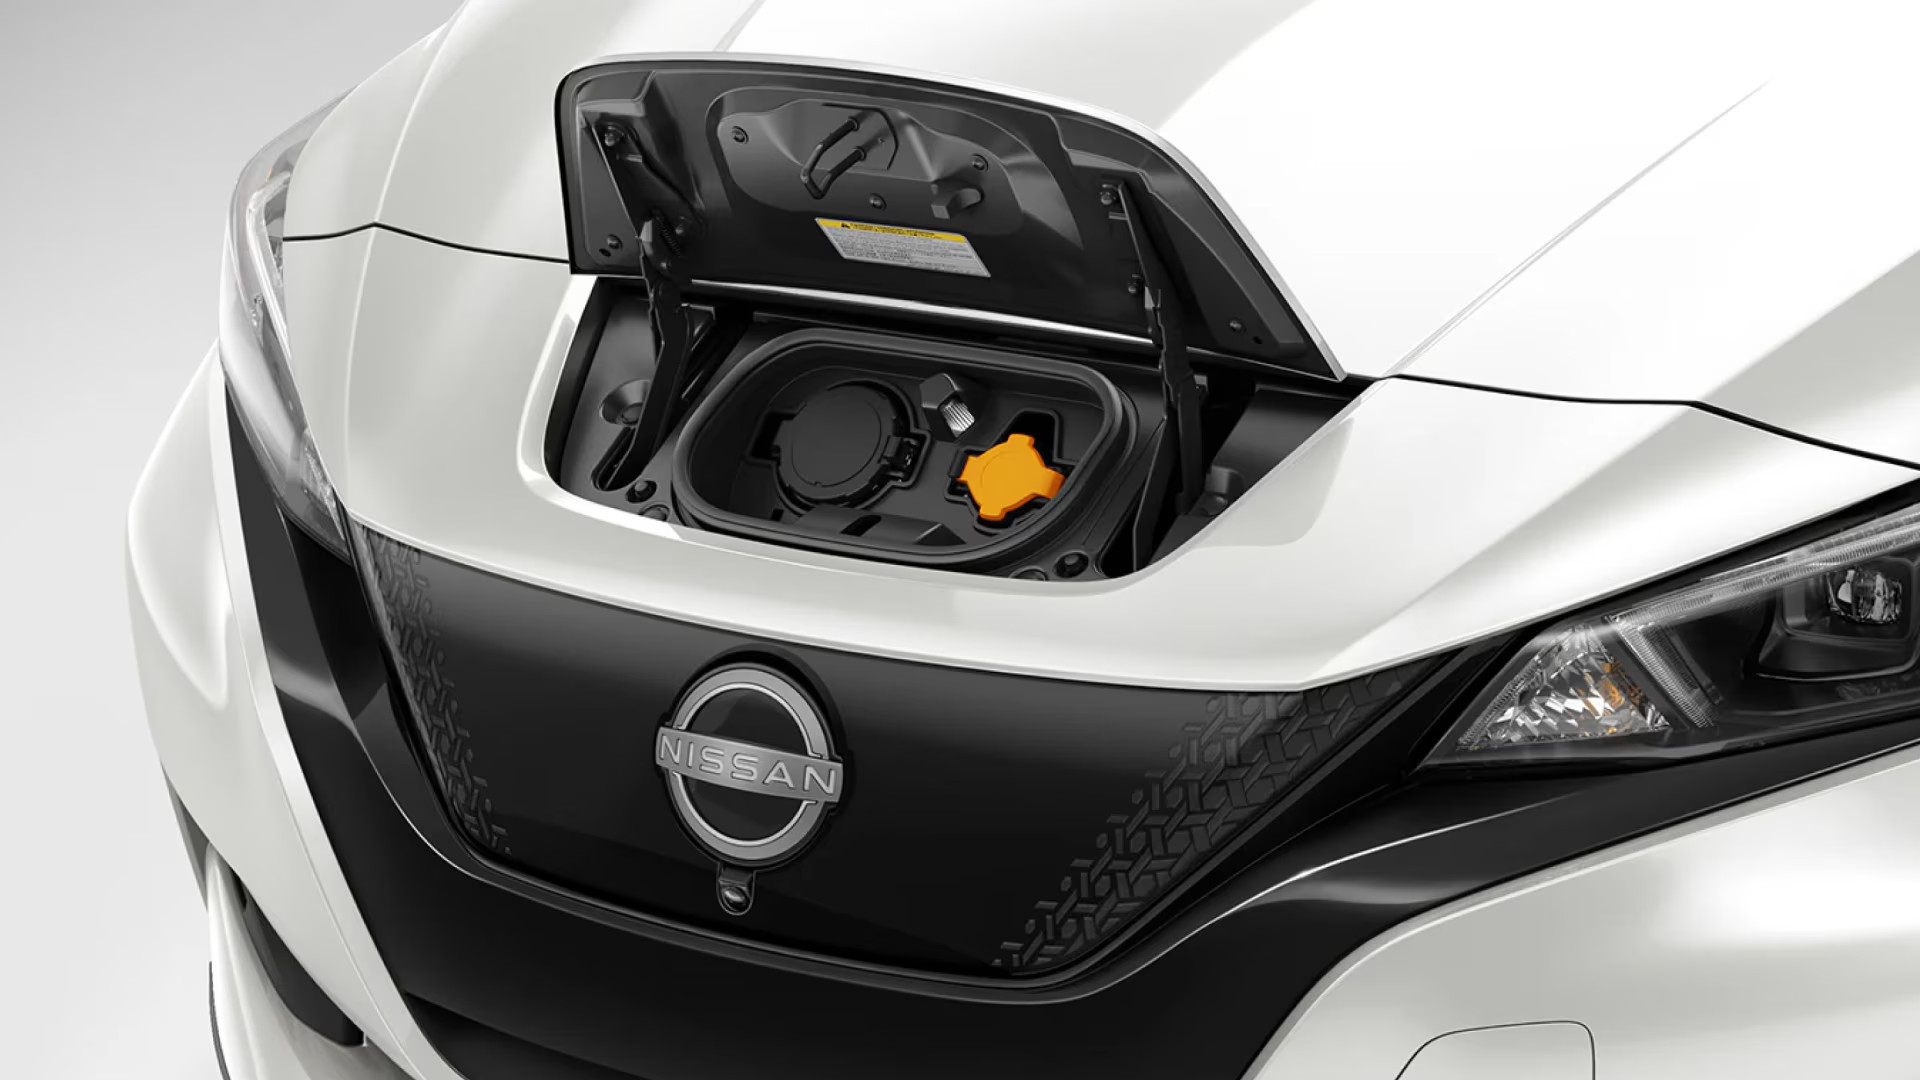 Nissan Isn't Making a NACS, CCS EV Charging Adapter for Leaf Owners